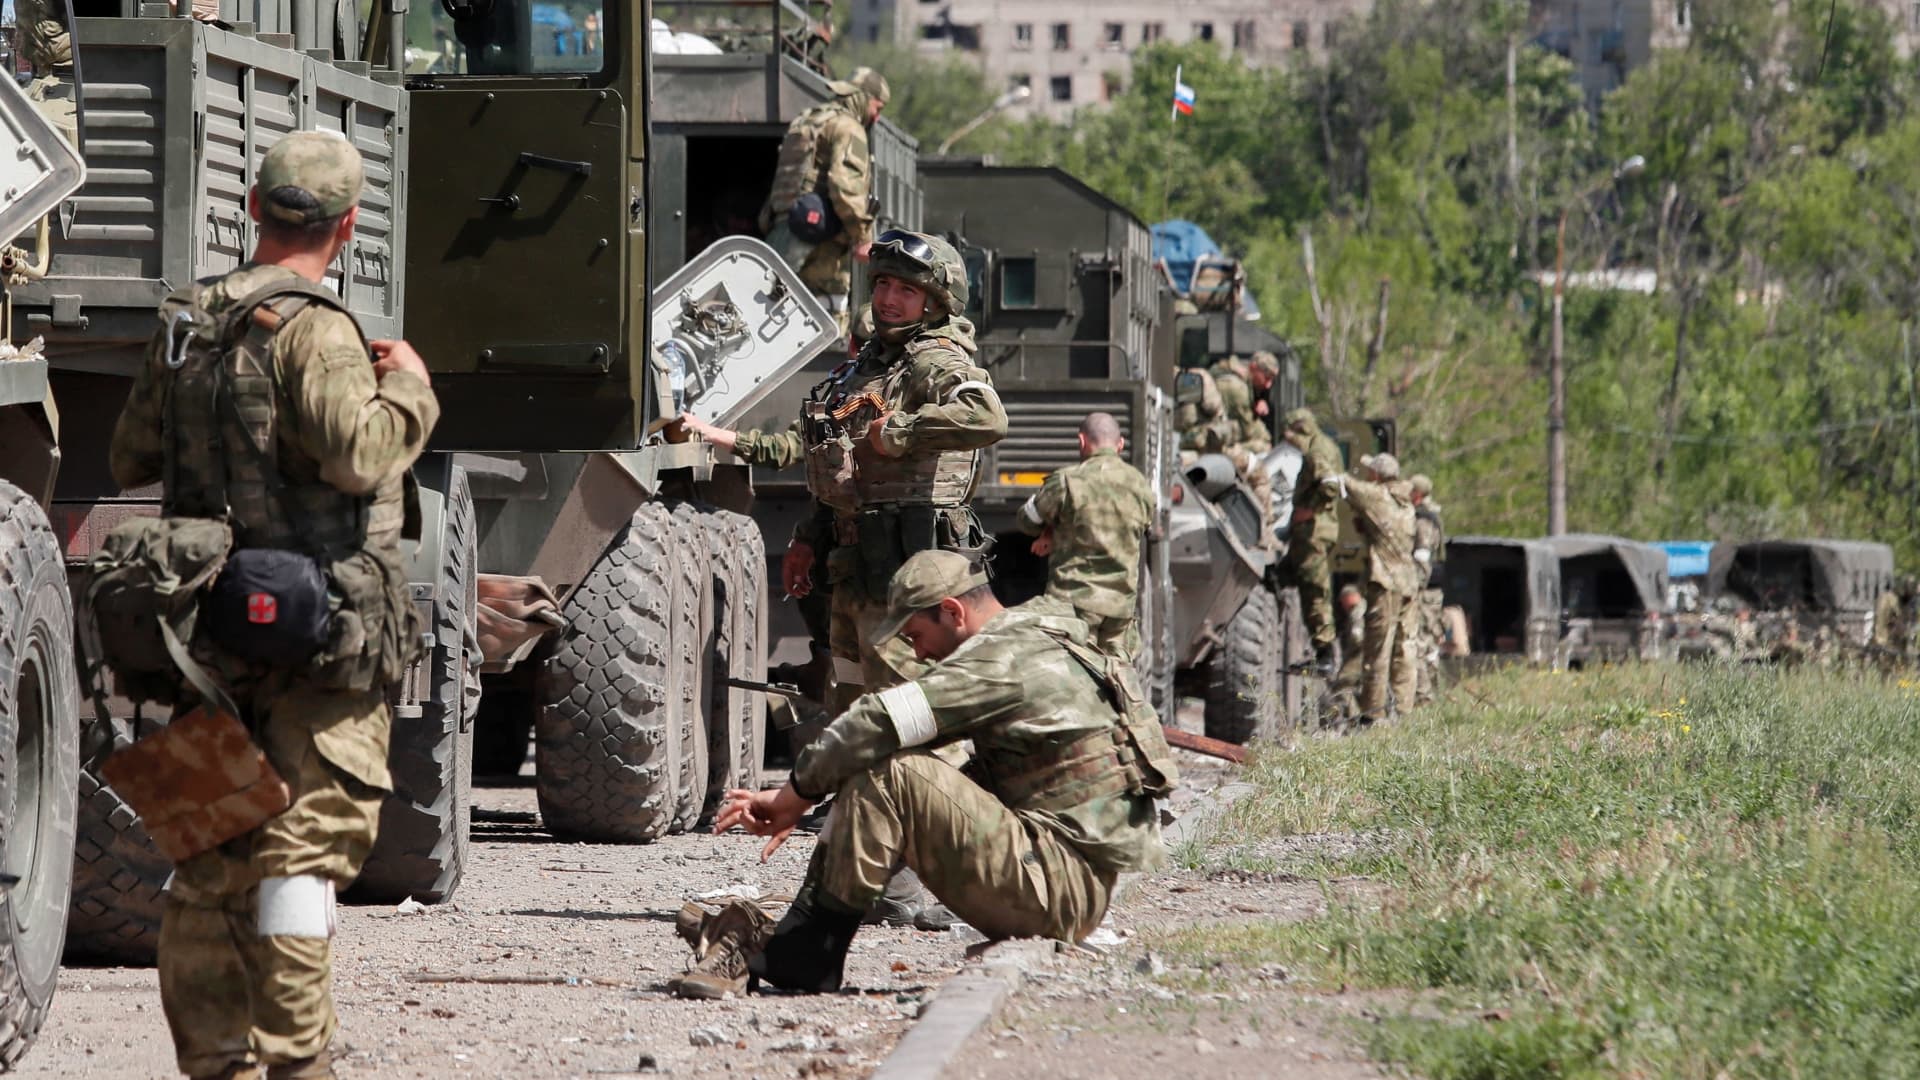 A convoy of pro-Russian troops in Mariupol, Ukraine, on May 16, 2022.